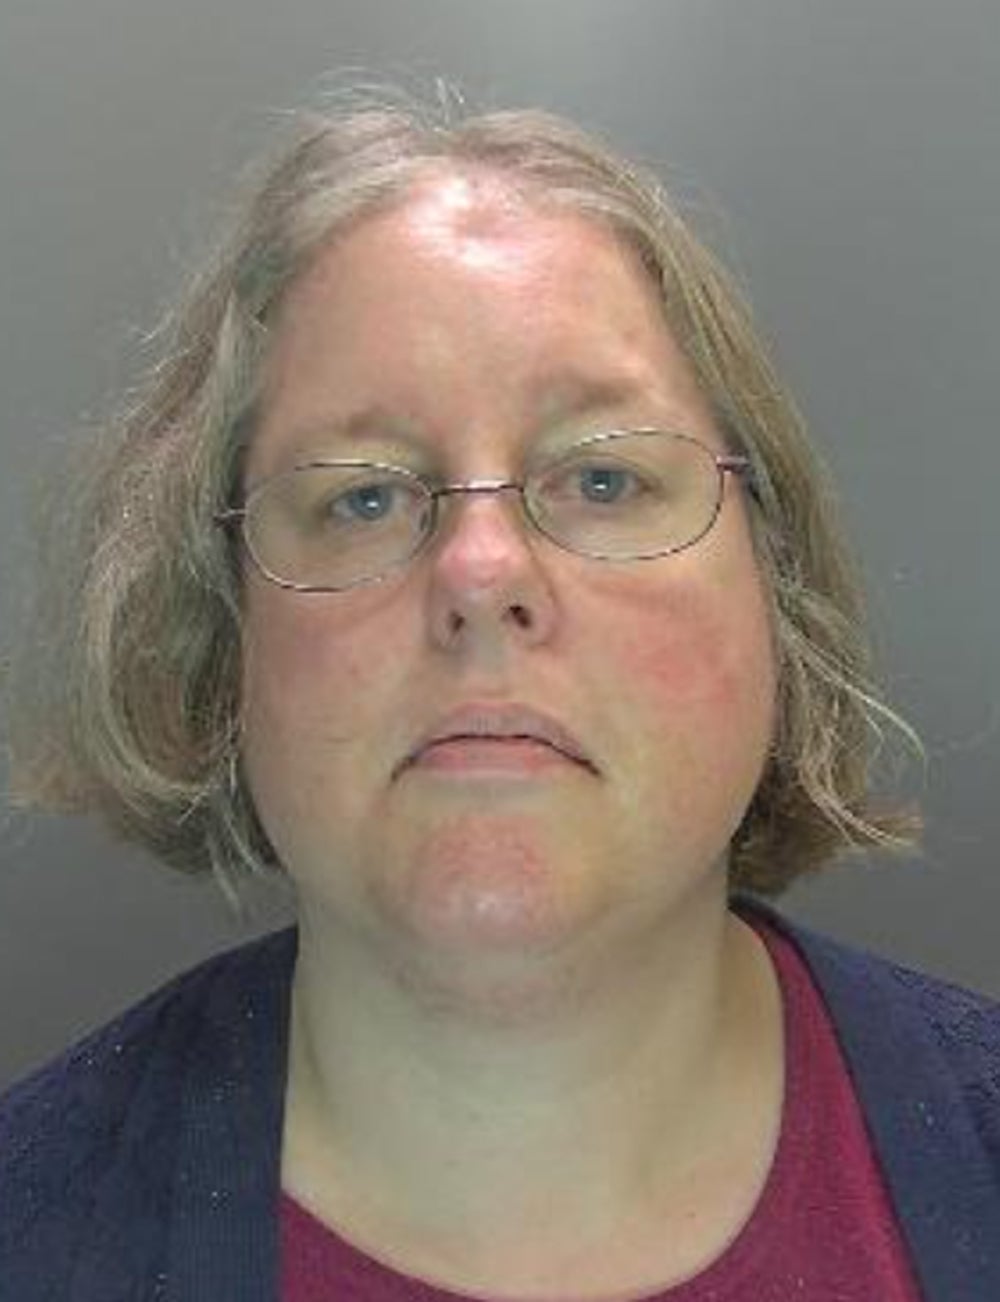 Auriol Grey shouted and waved her arm aggressively at retired midwife Celia Ward